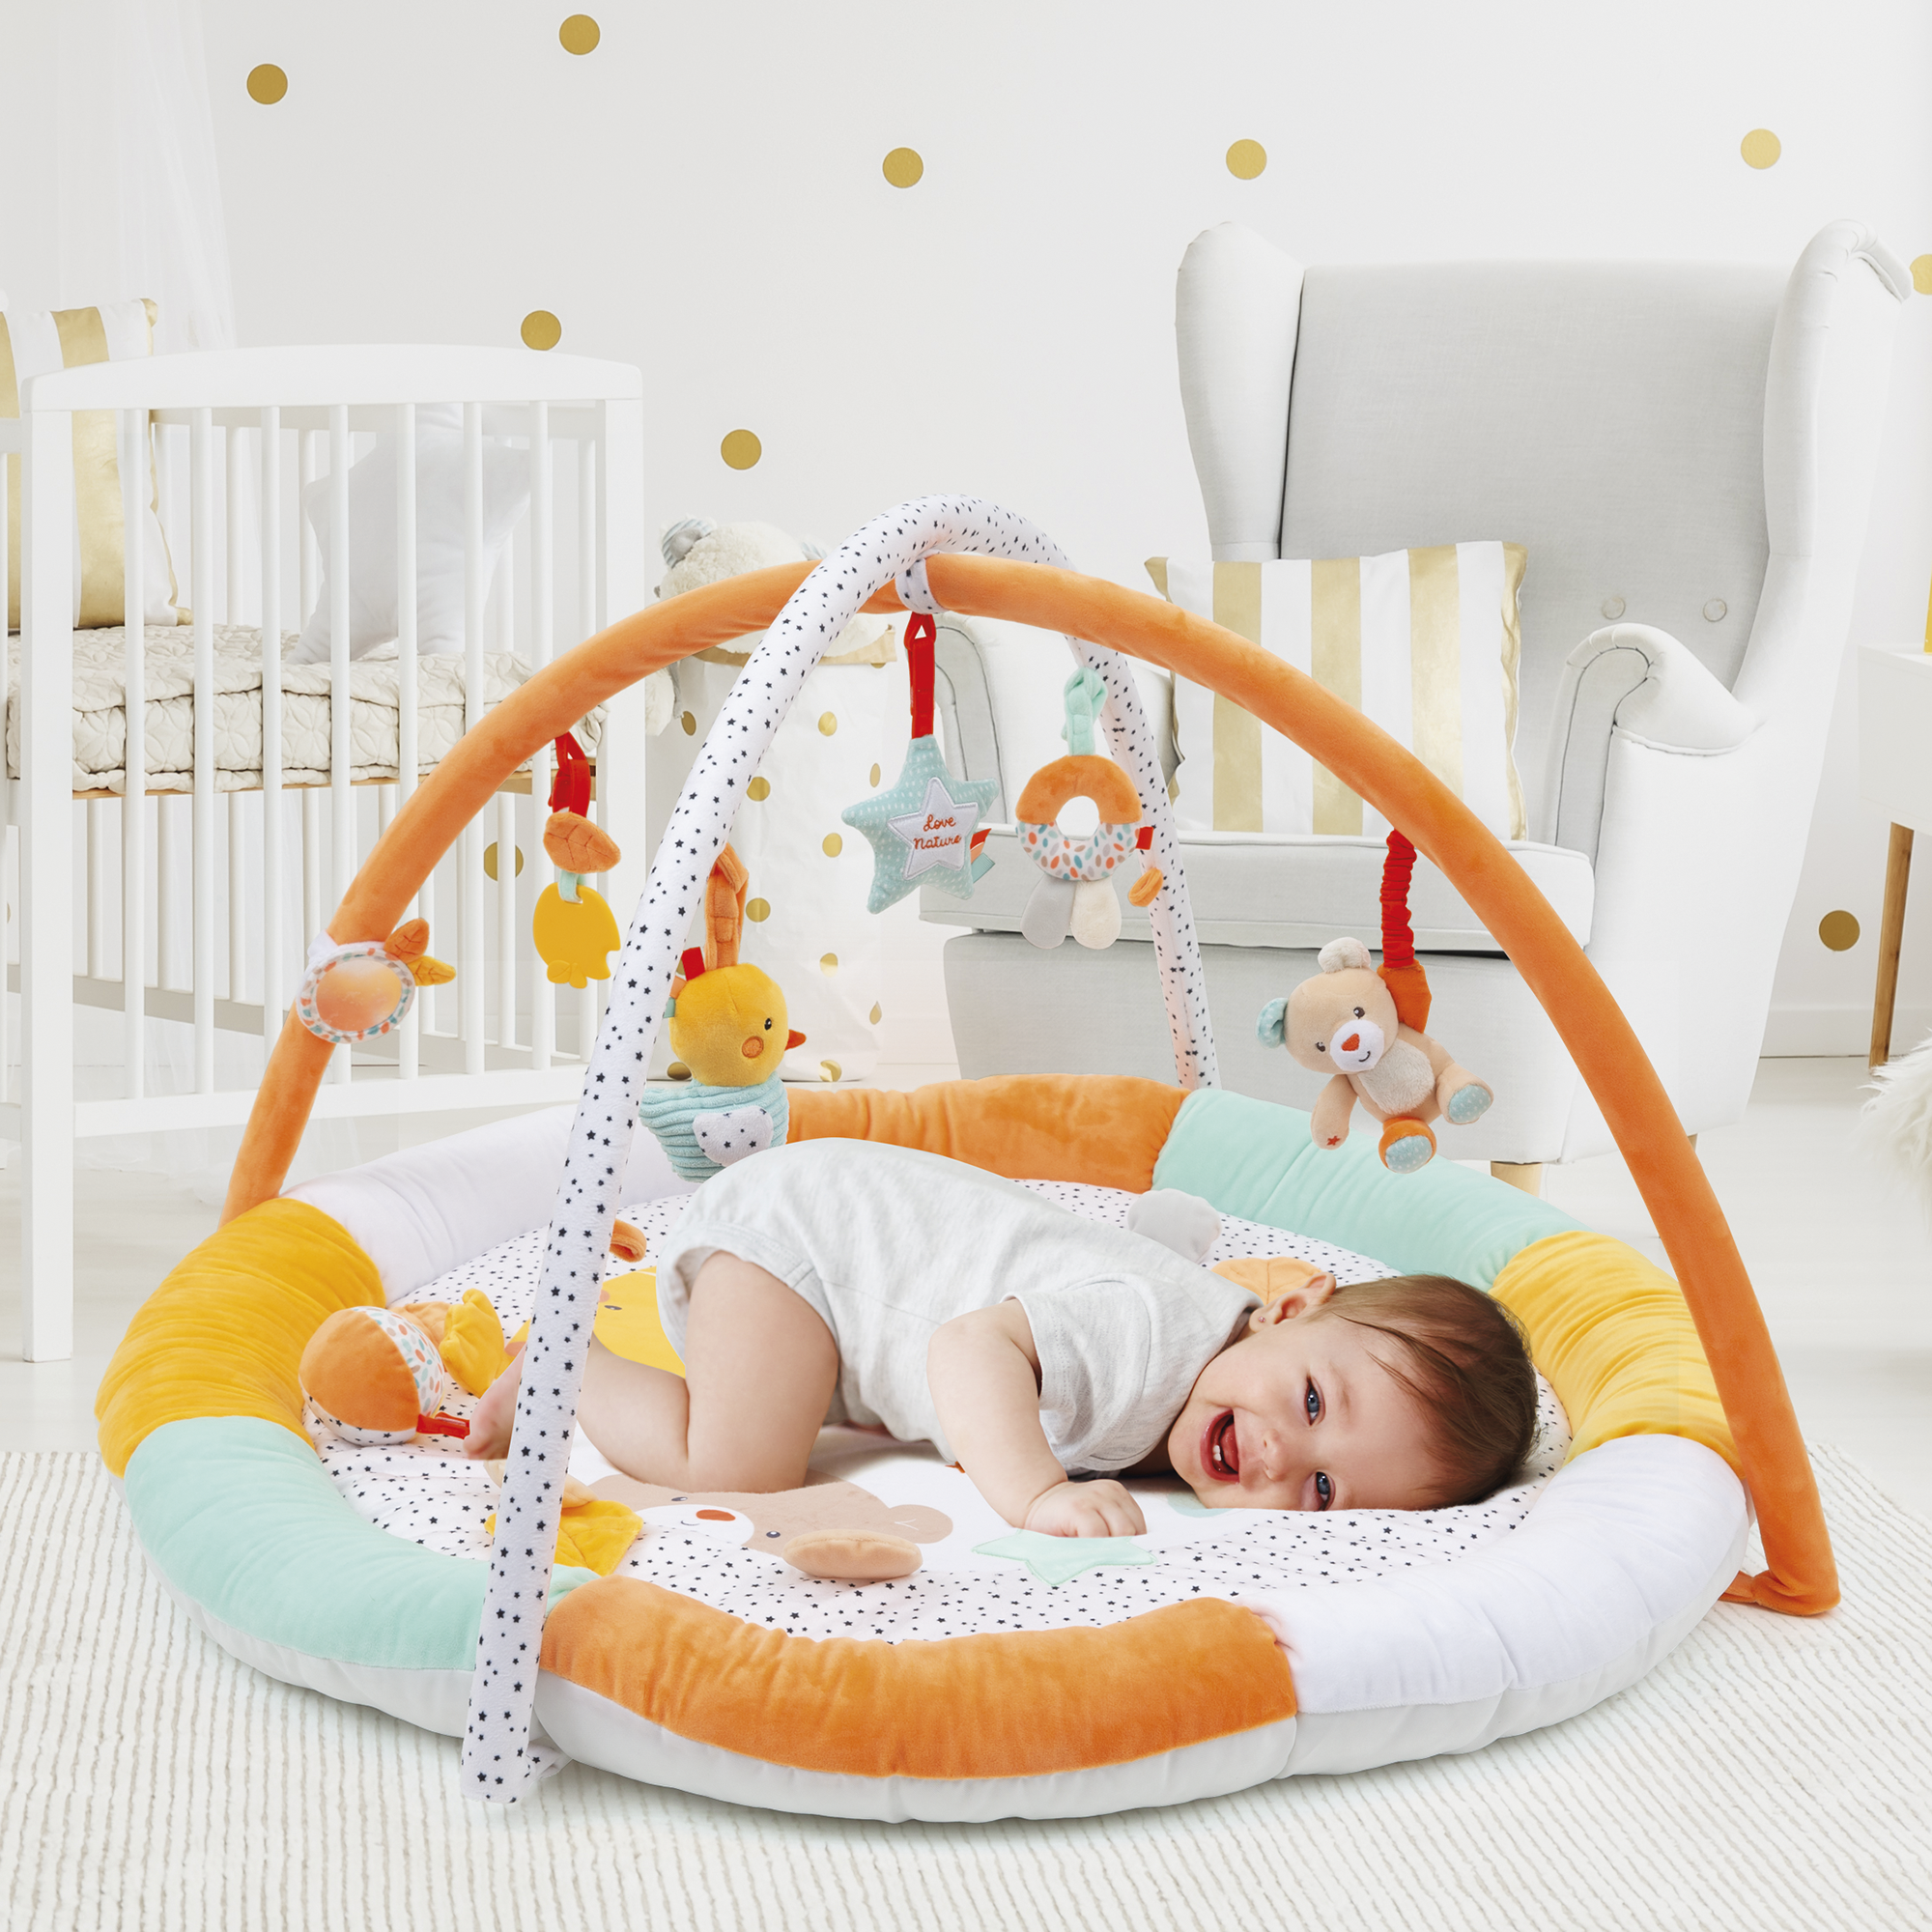 Palestrina play & relax baby gym - BABY SMILE SOFT